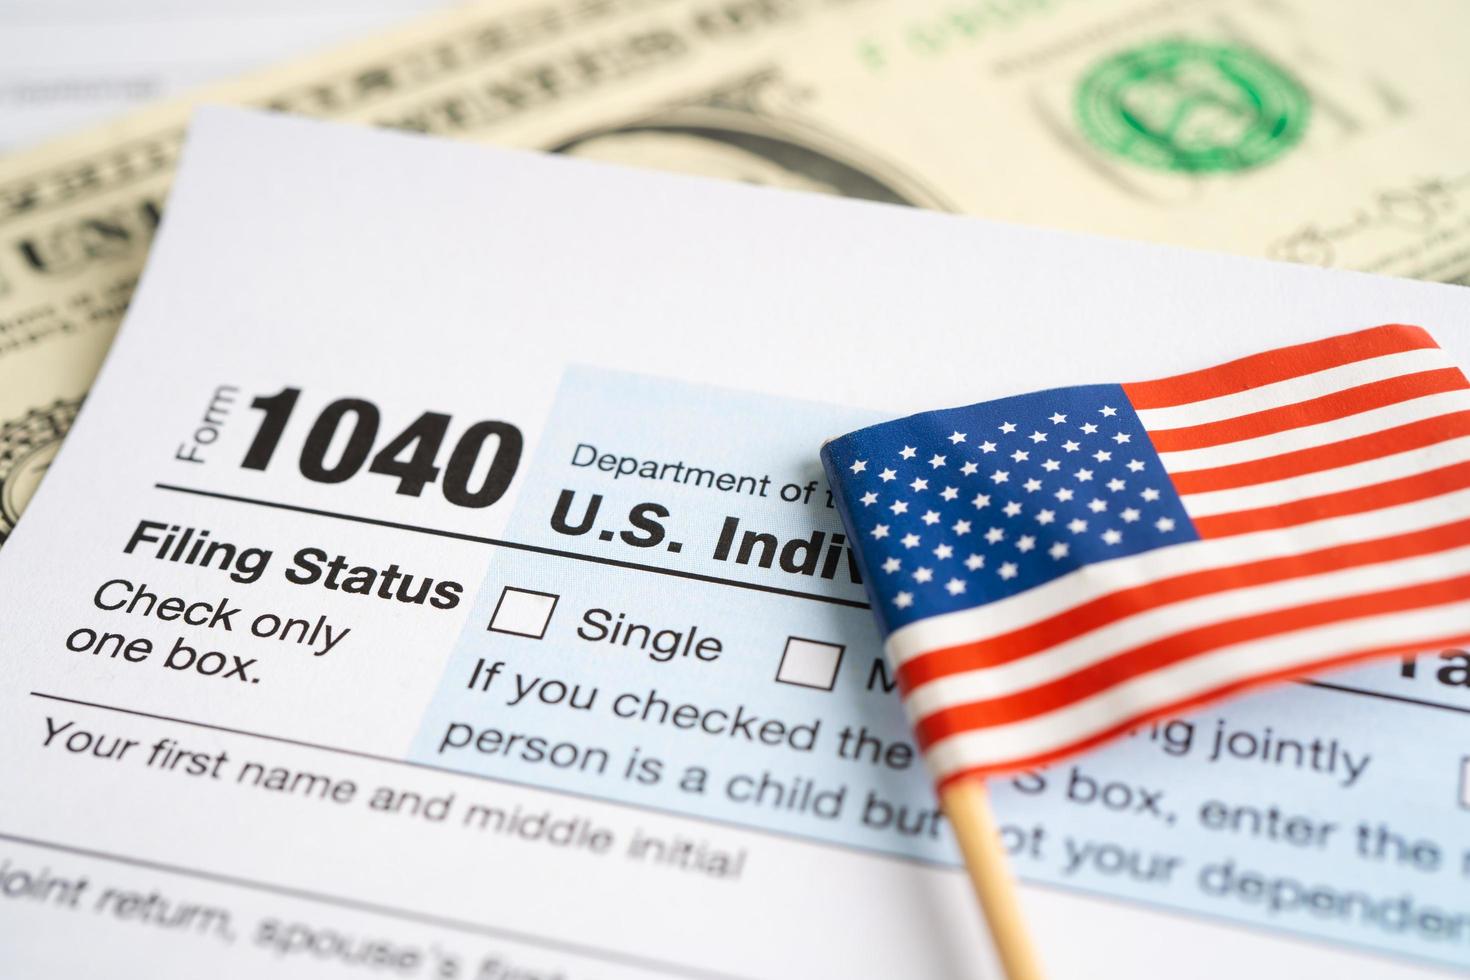 Tax Return form 1040 with USA America flag and dollar banknote, U.S. Individual Income. photo